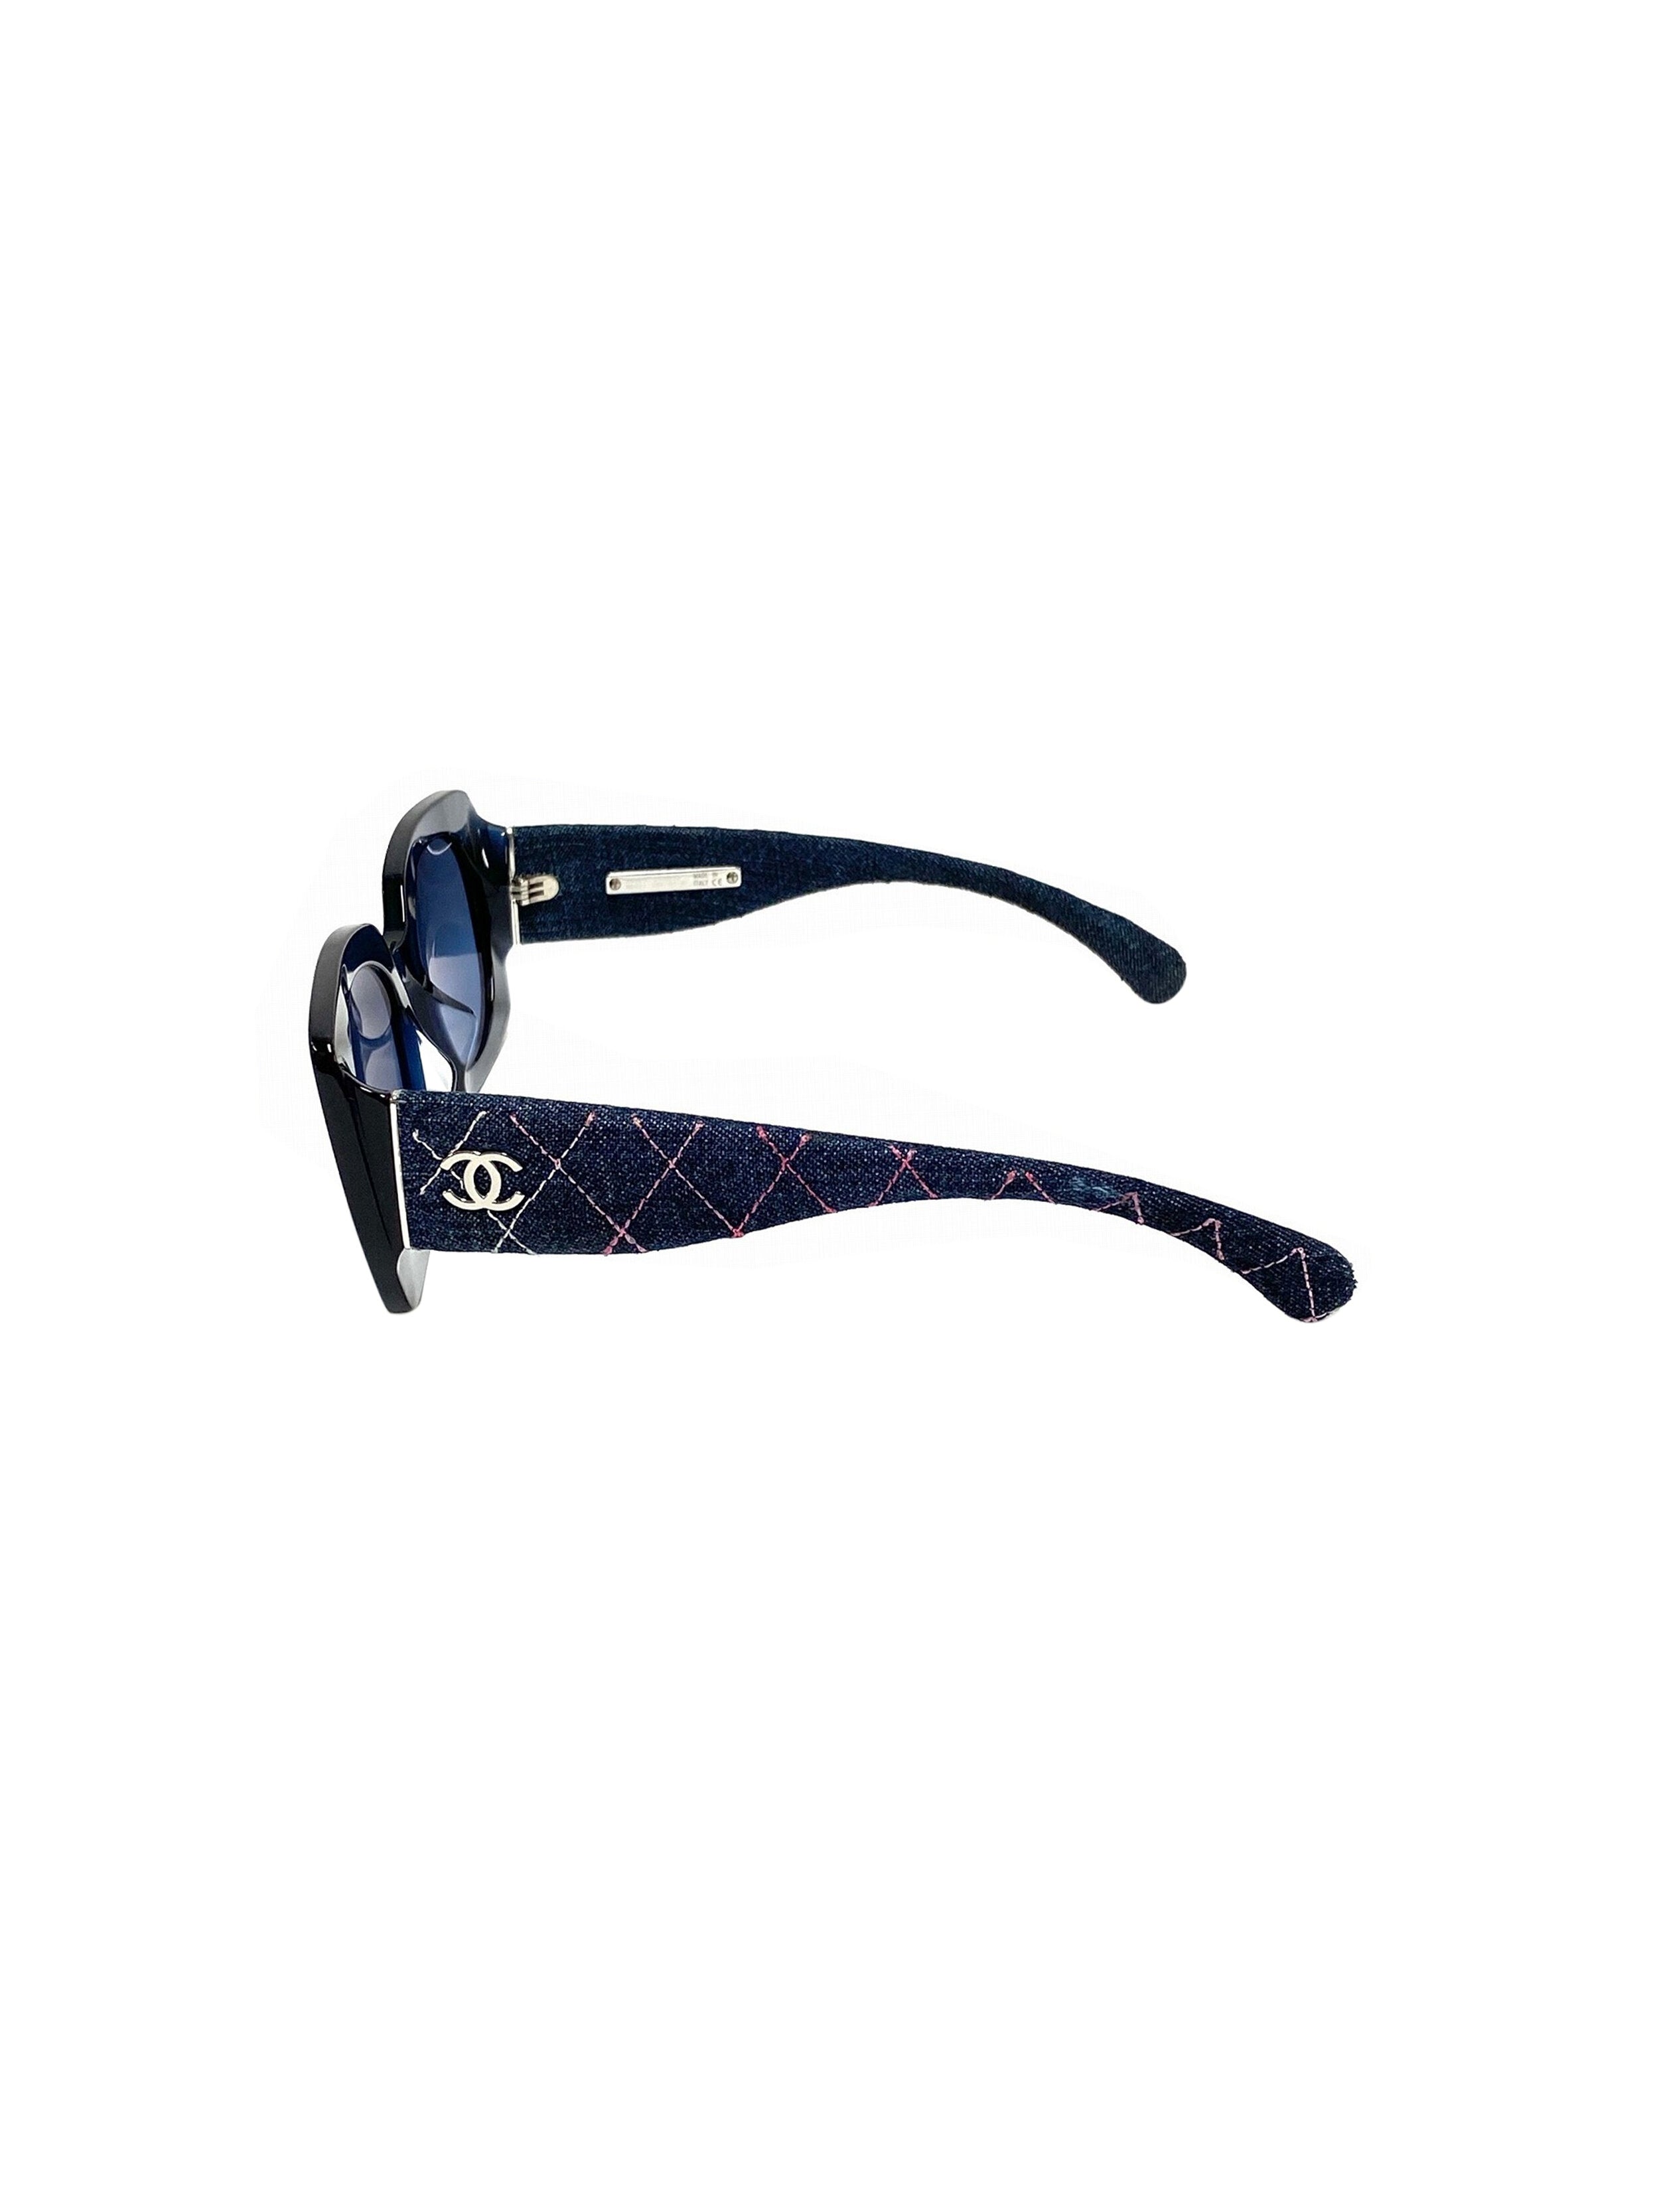 Sunglasses Chanel - Metal and denim rounded sunglasses - CH4248JC28587